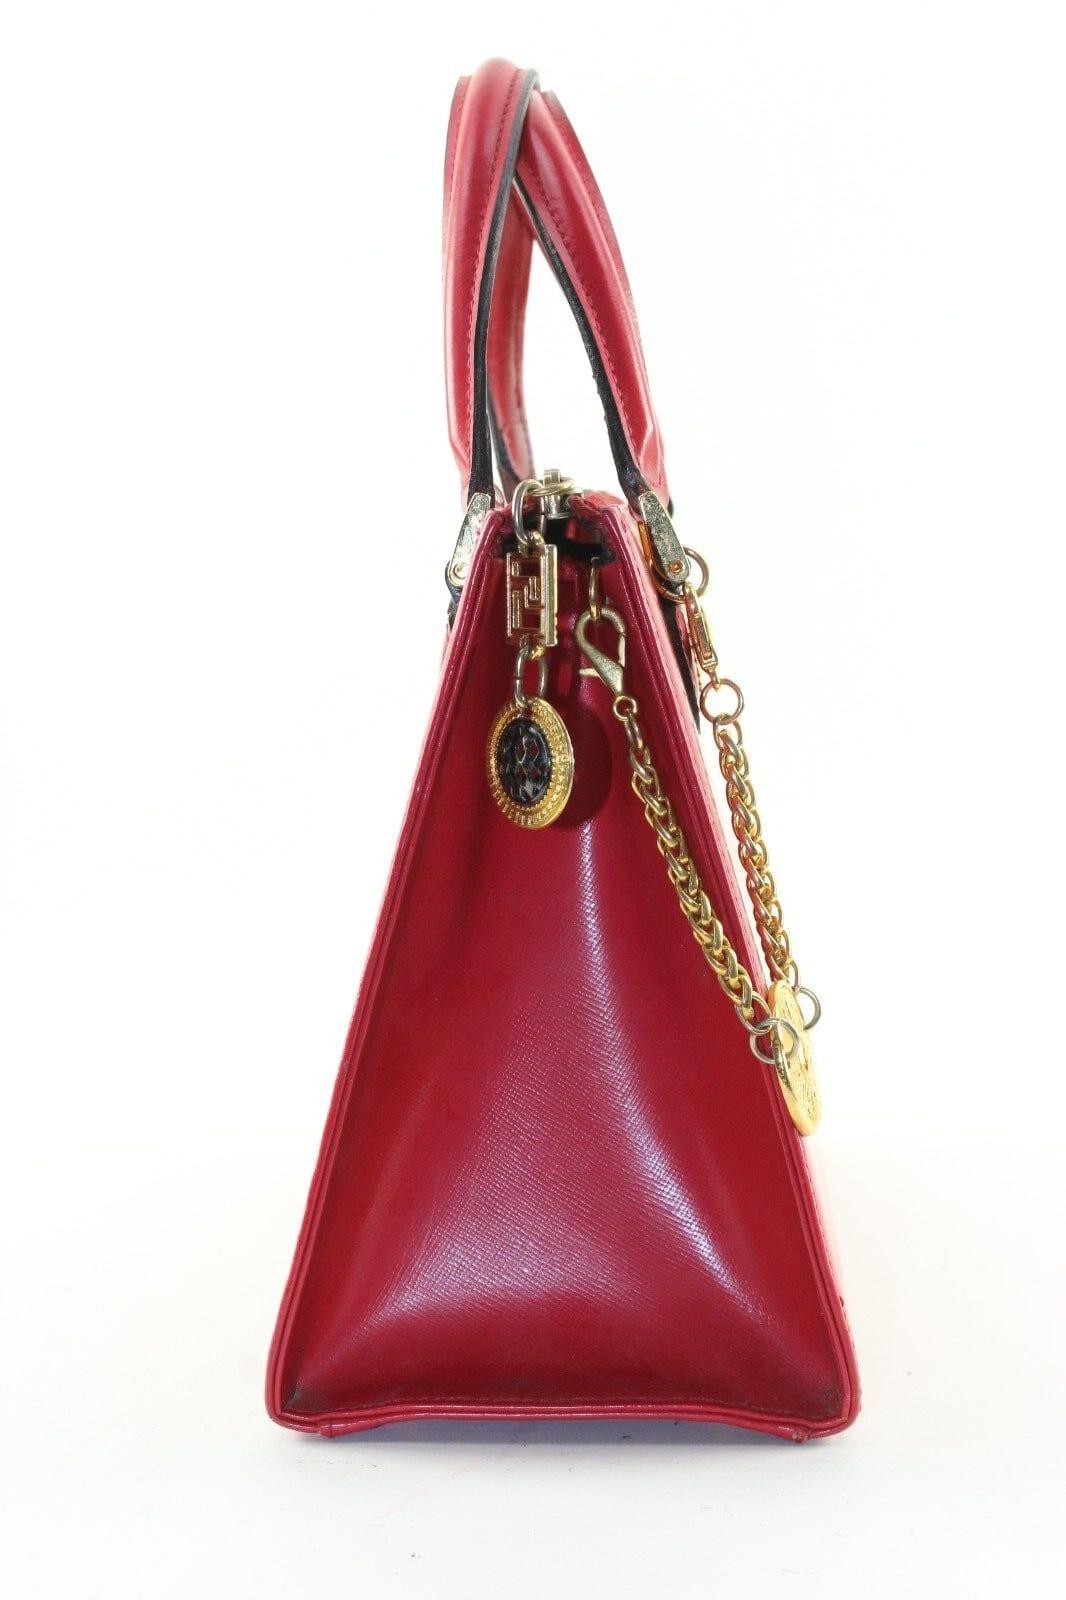 Versace Red Leather Charm Tote 5VER1214K
Date Code/Serial Number: N/A

Made In: N/A

Measurements: Length:  10